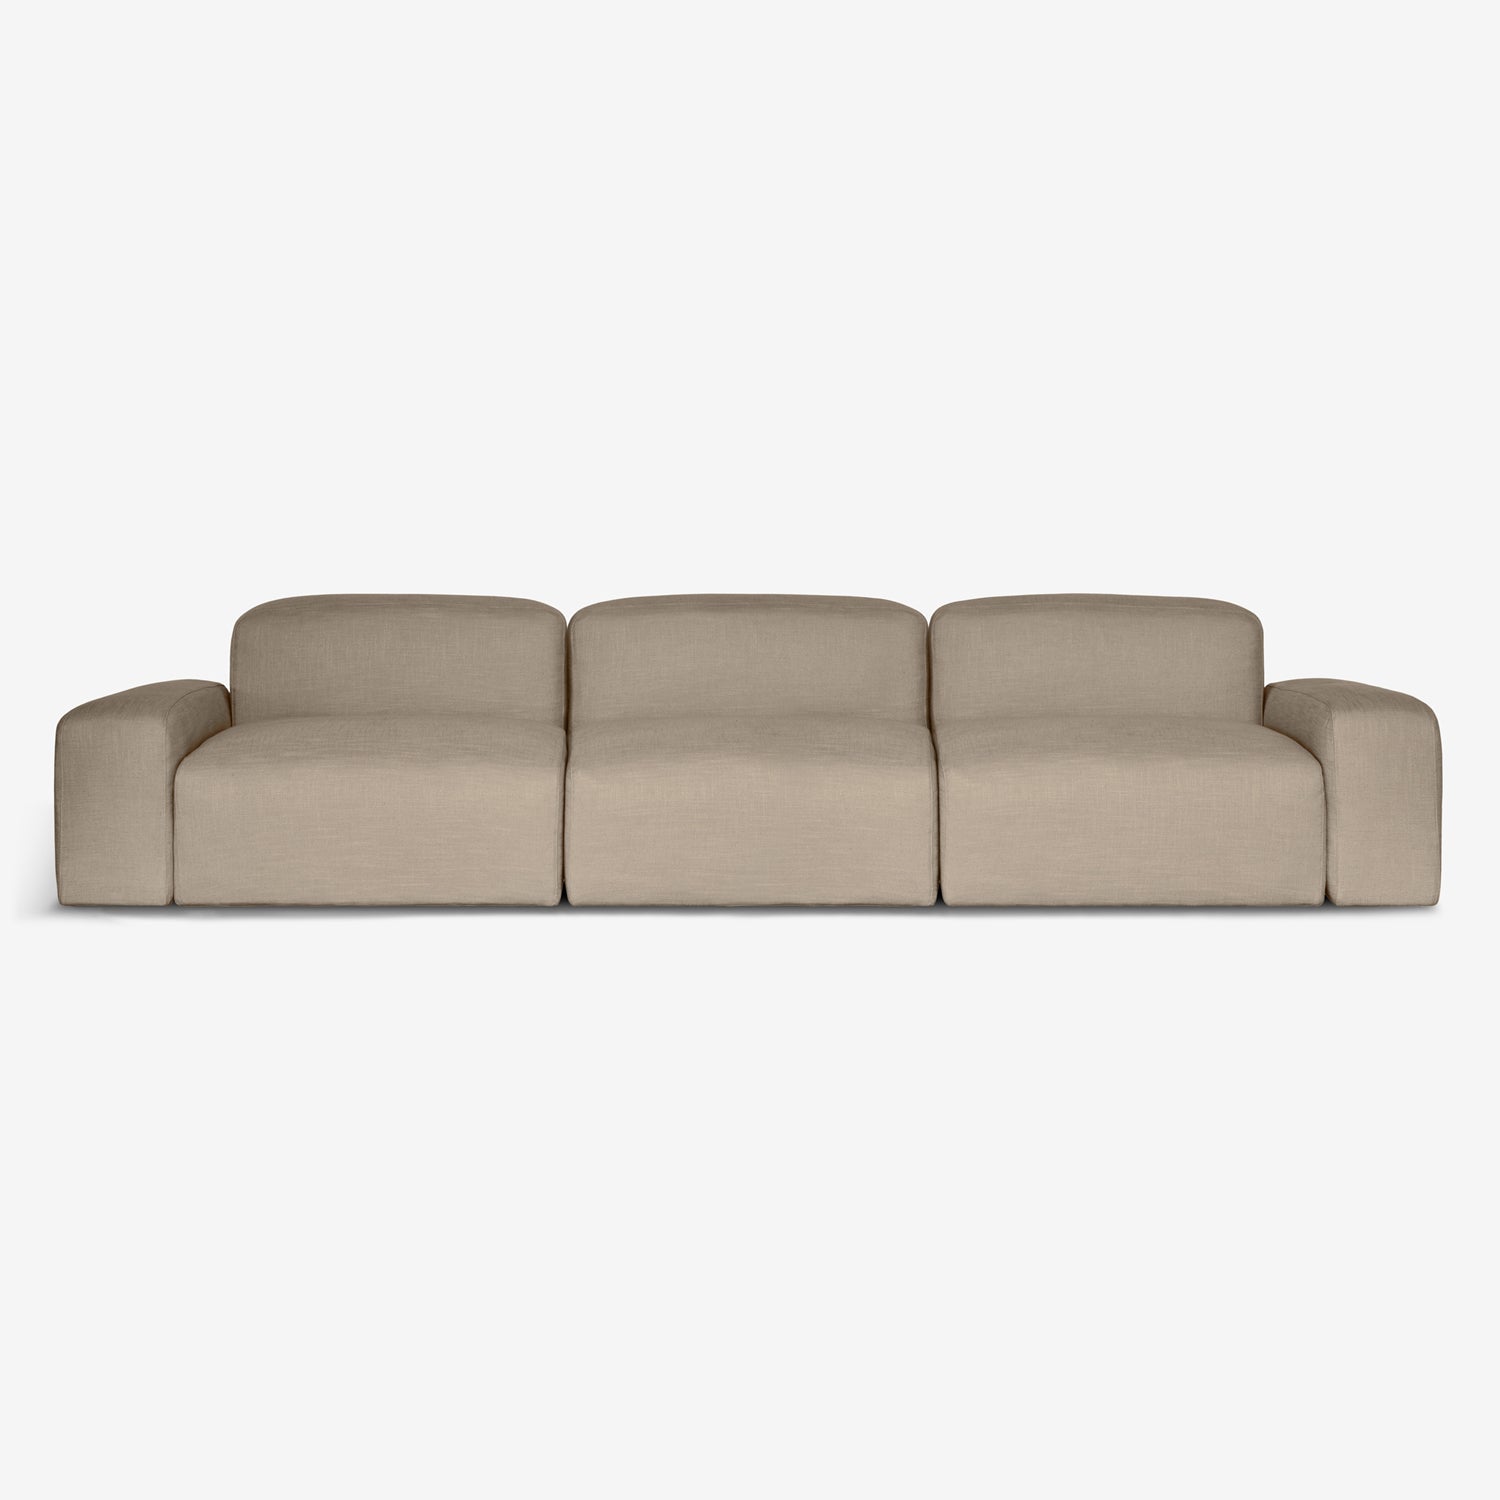 Nature-Inspired Sophistication: Libero 3 seater sofa in beige